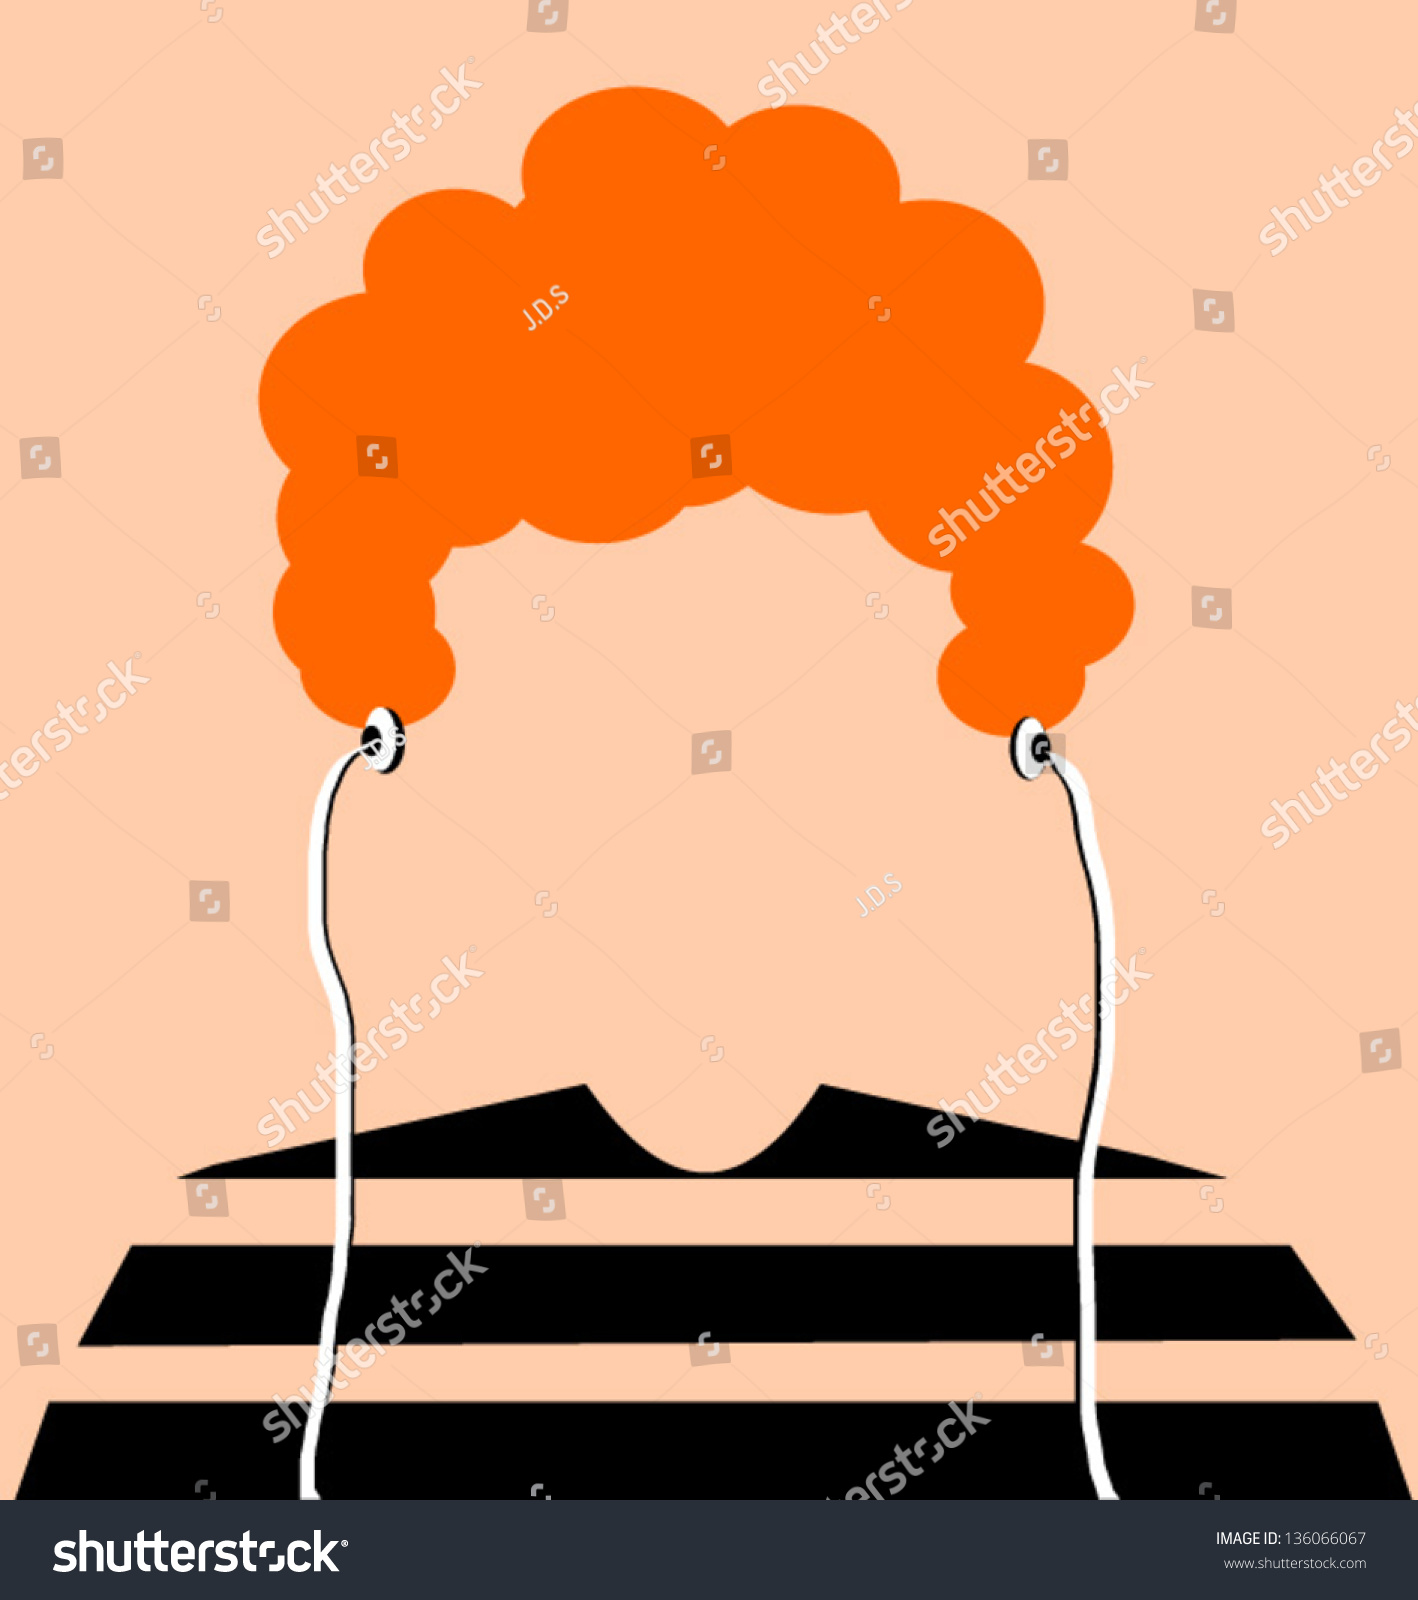 SVG of man with orange hair and earphones svg